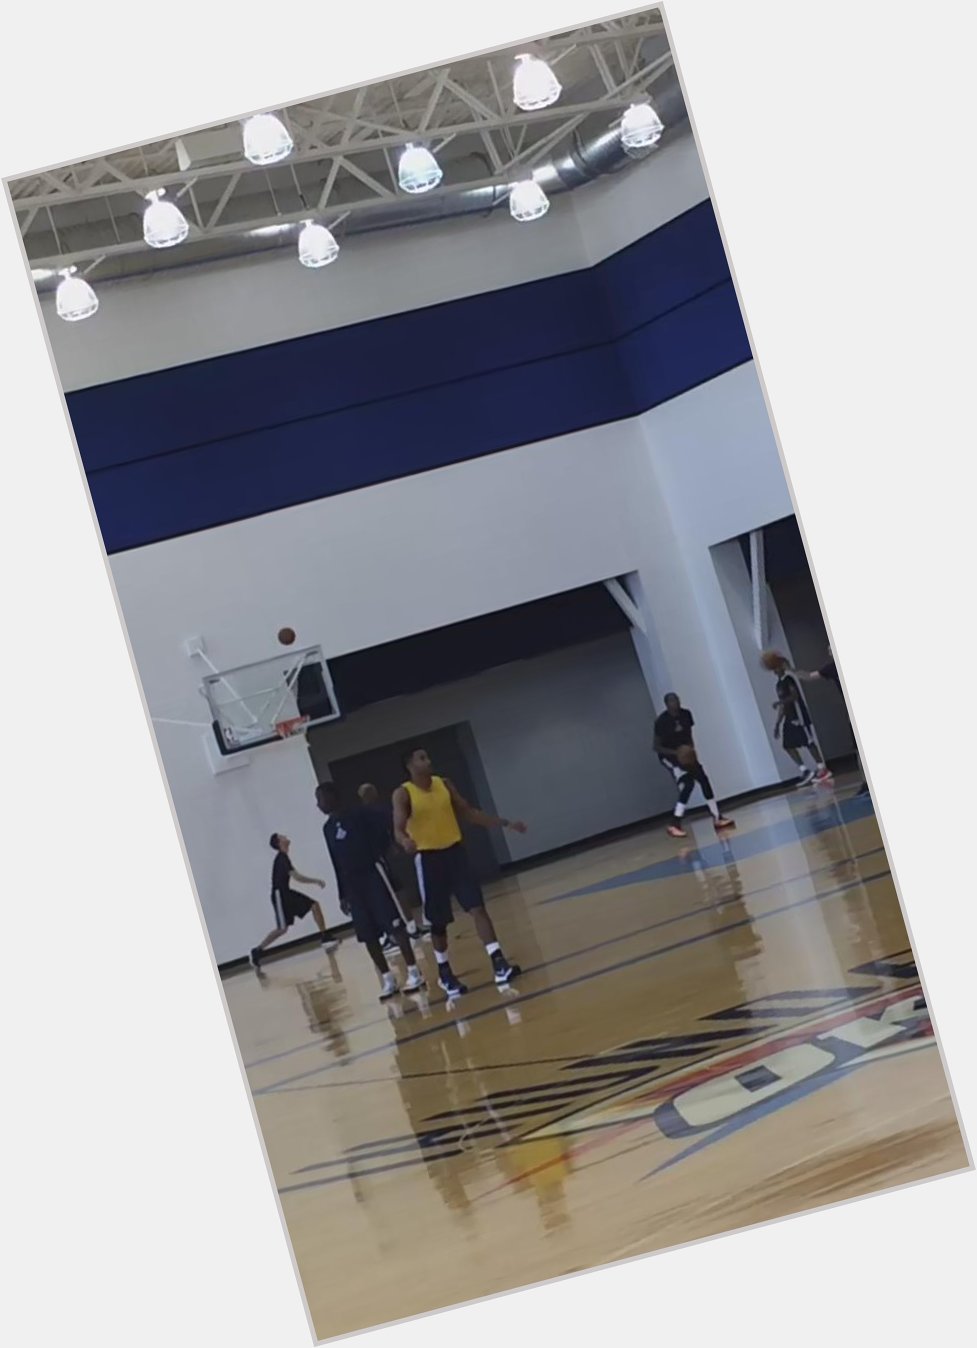 Happy Birthday Day 1 -- Kevin Durant training with new assistant coach Monty Williams 